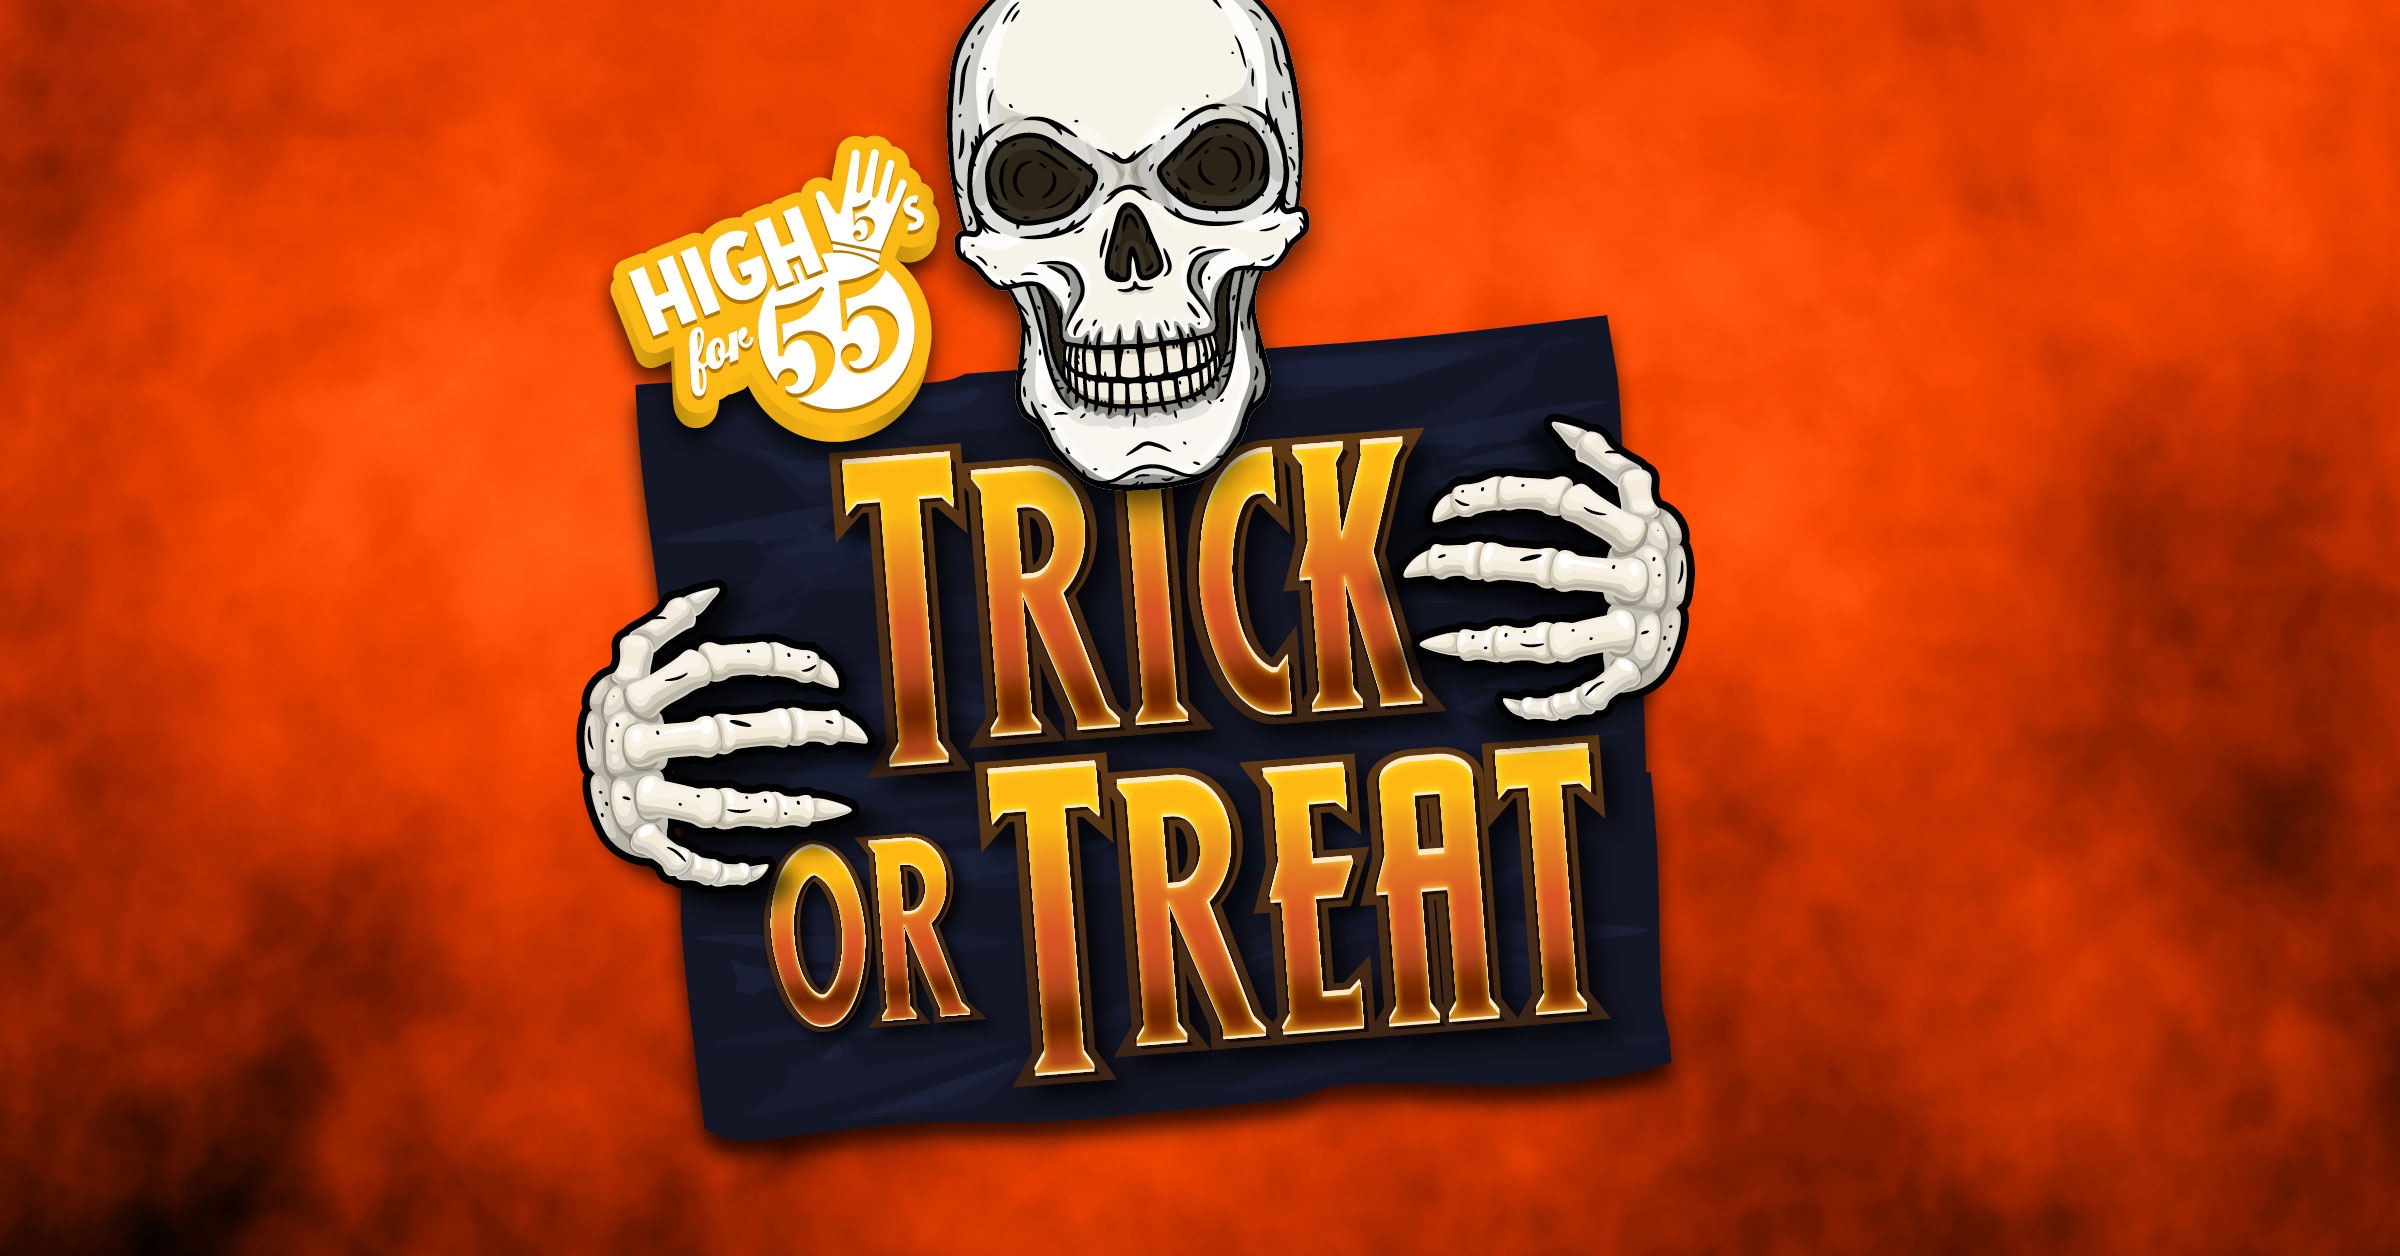 HIGH 5s for 55s: Trick or Treat